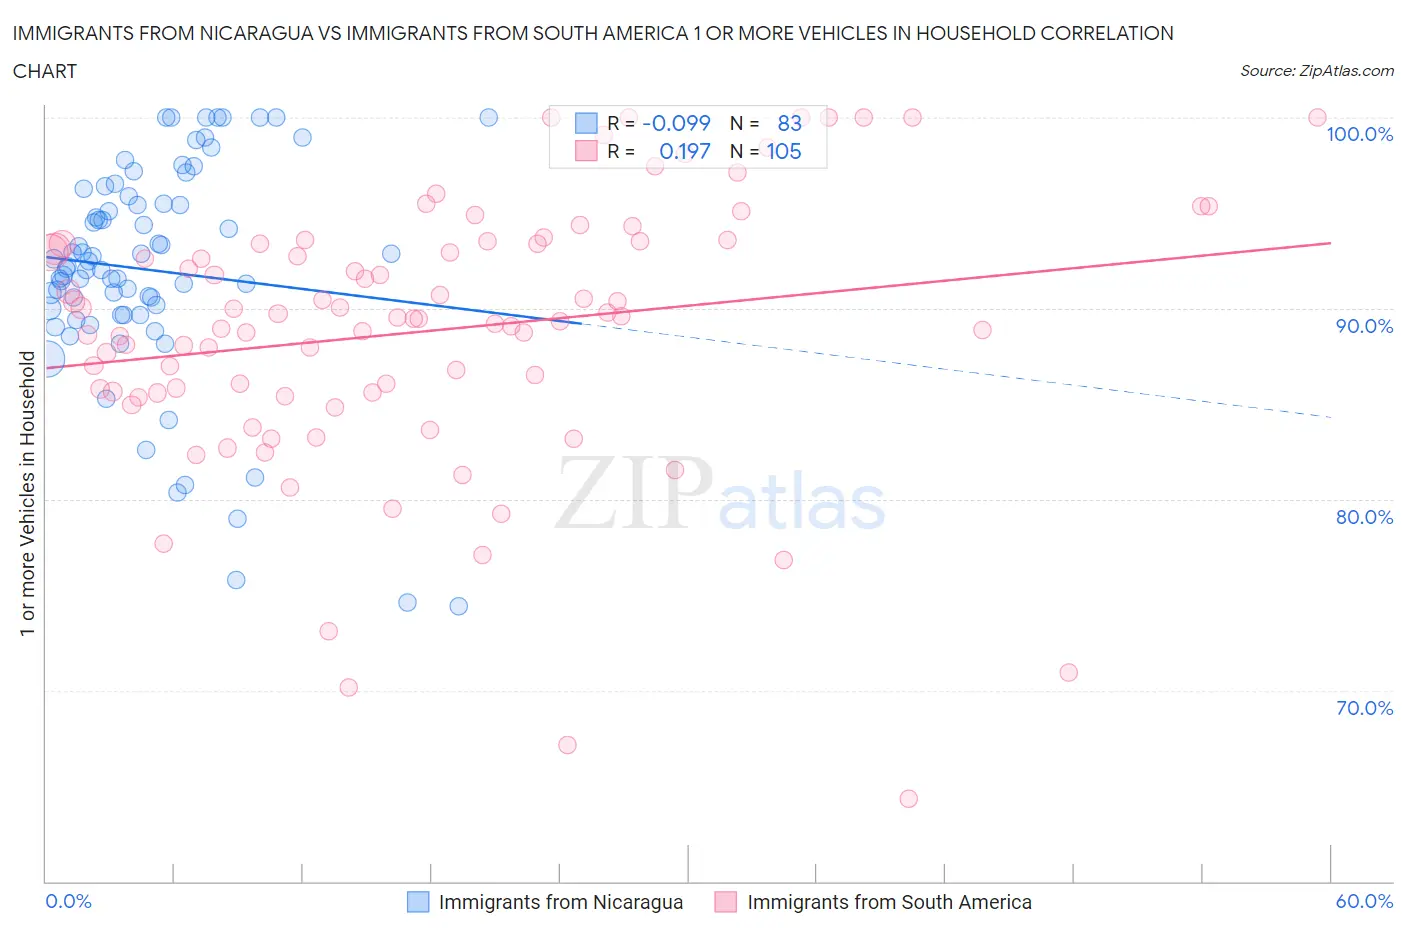 Immigrants from Nicaragua vs Immigrants from South America 1 or more Vehicles in Household